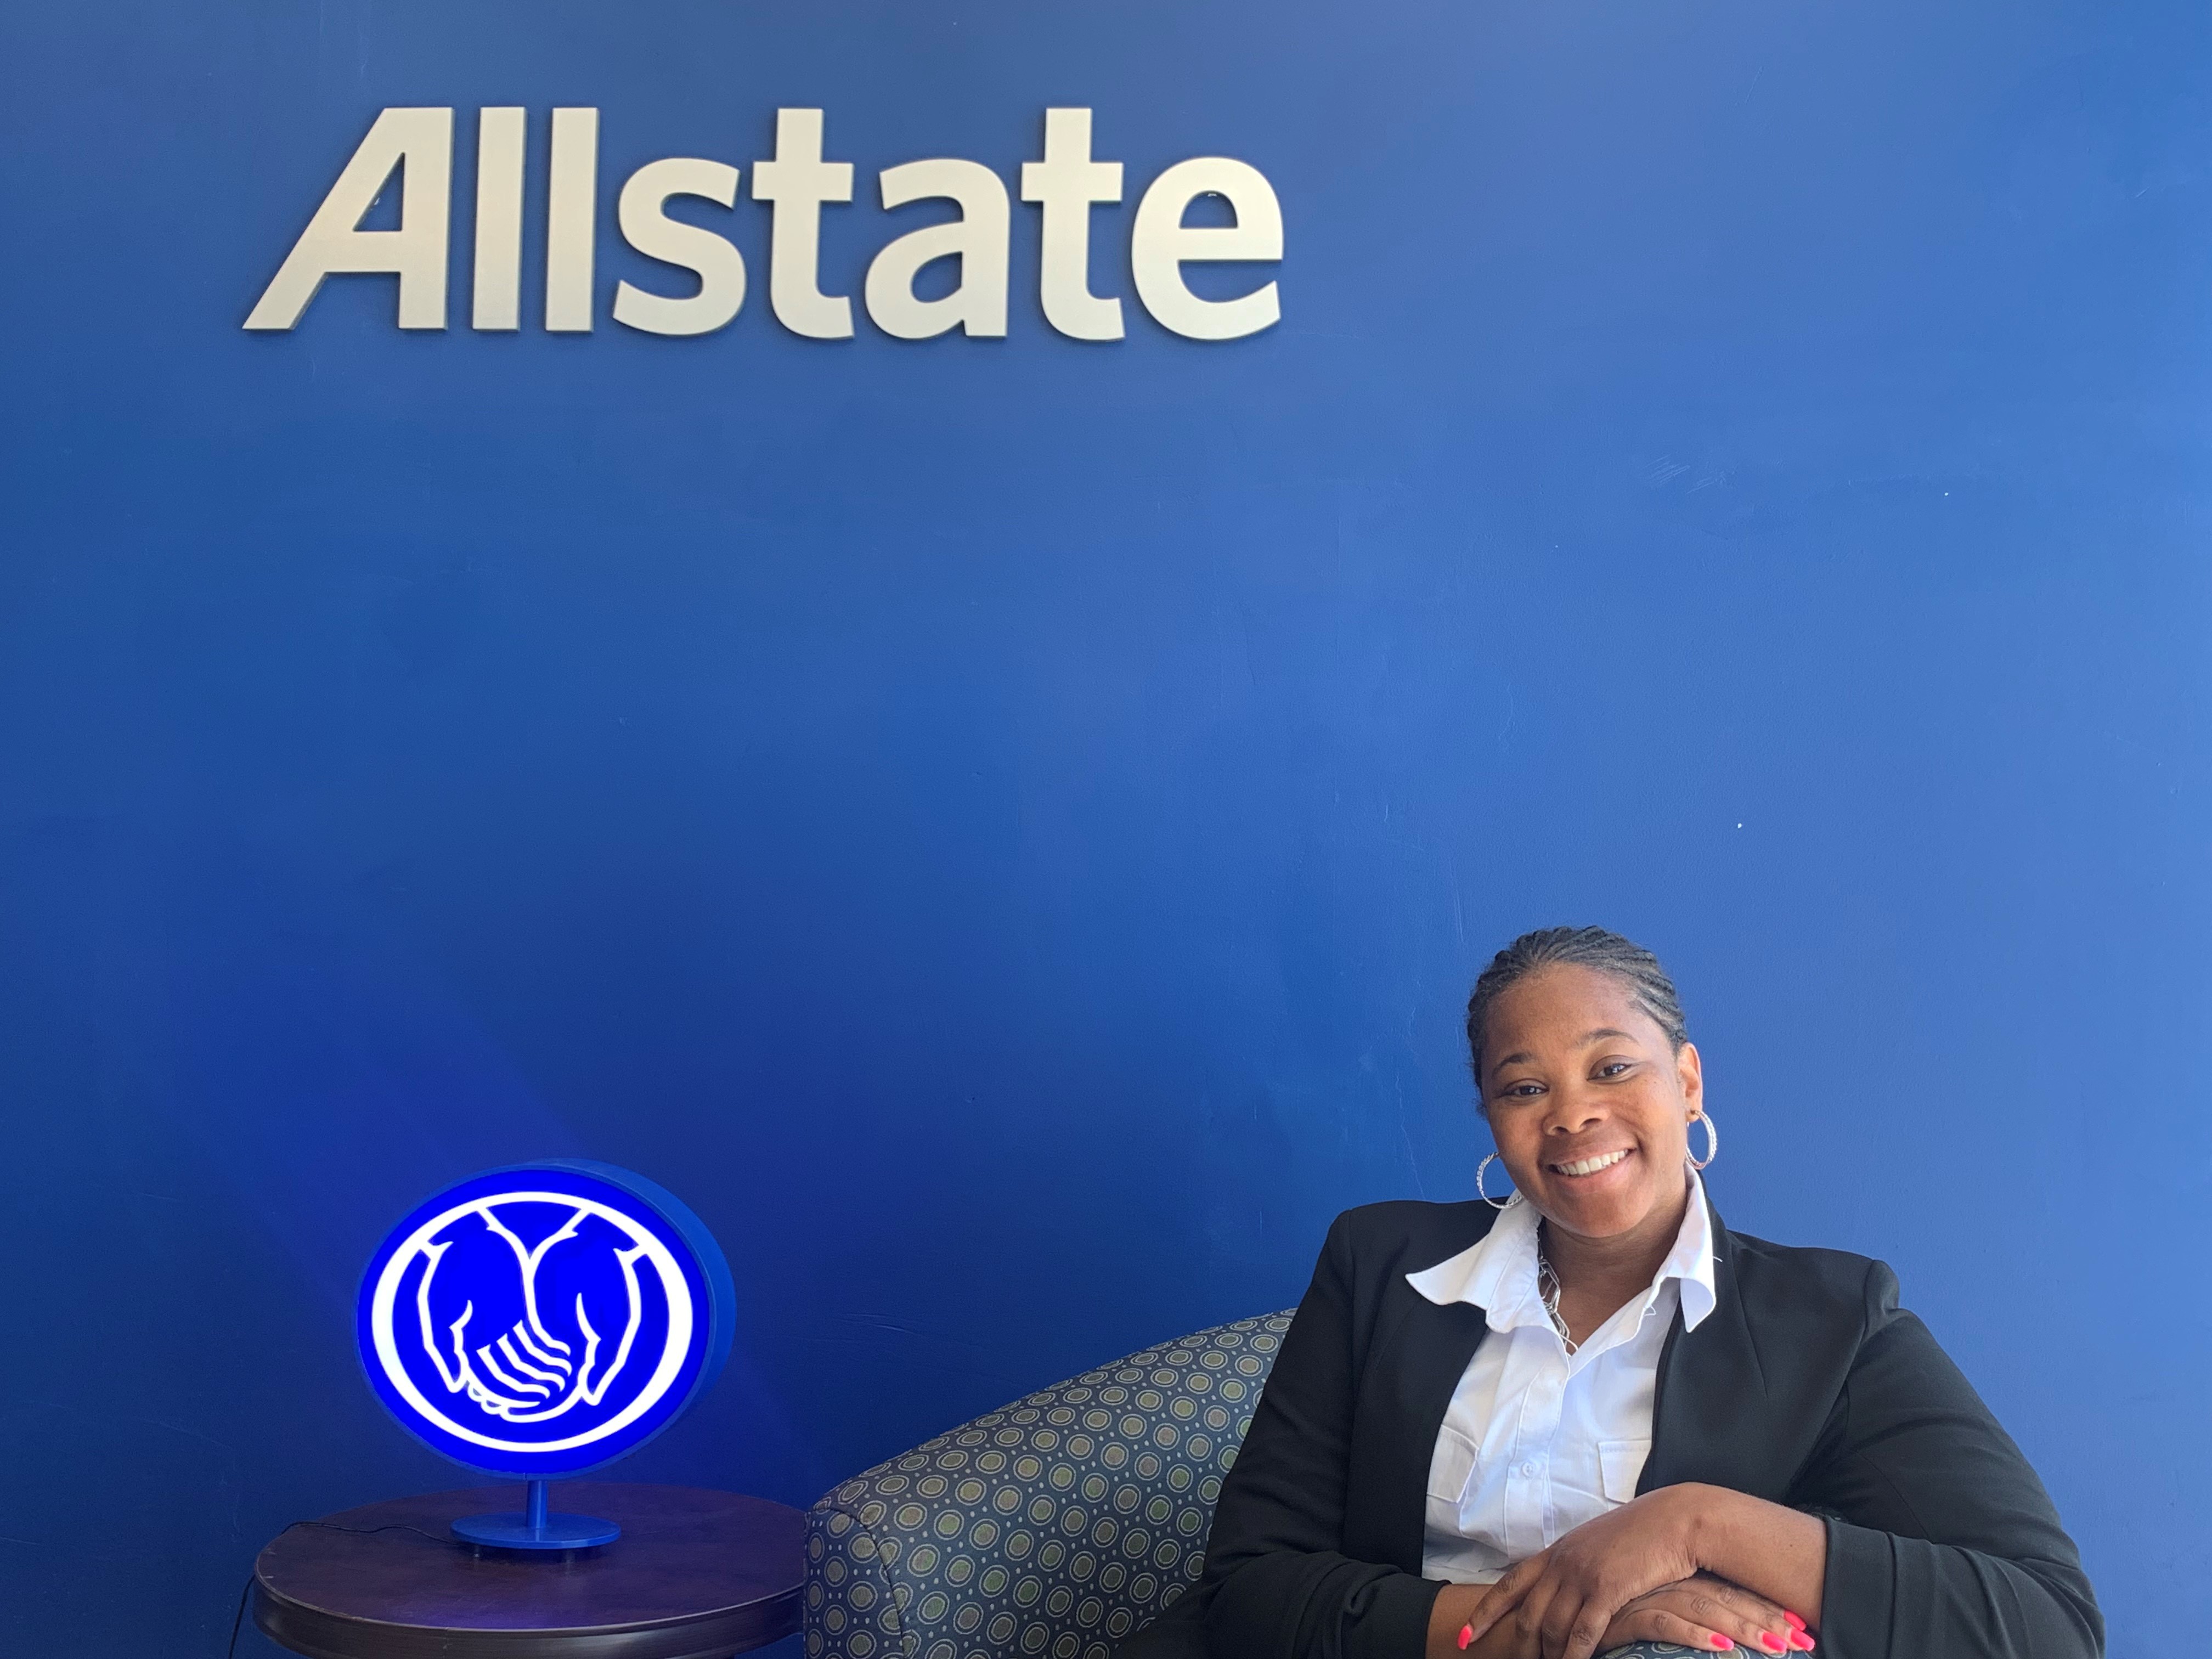 Chad Carter: Allstate Insurance Photo